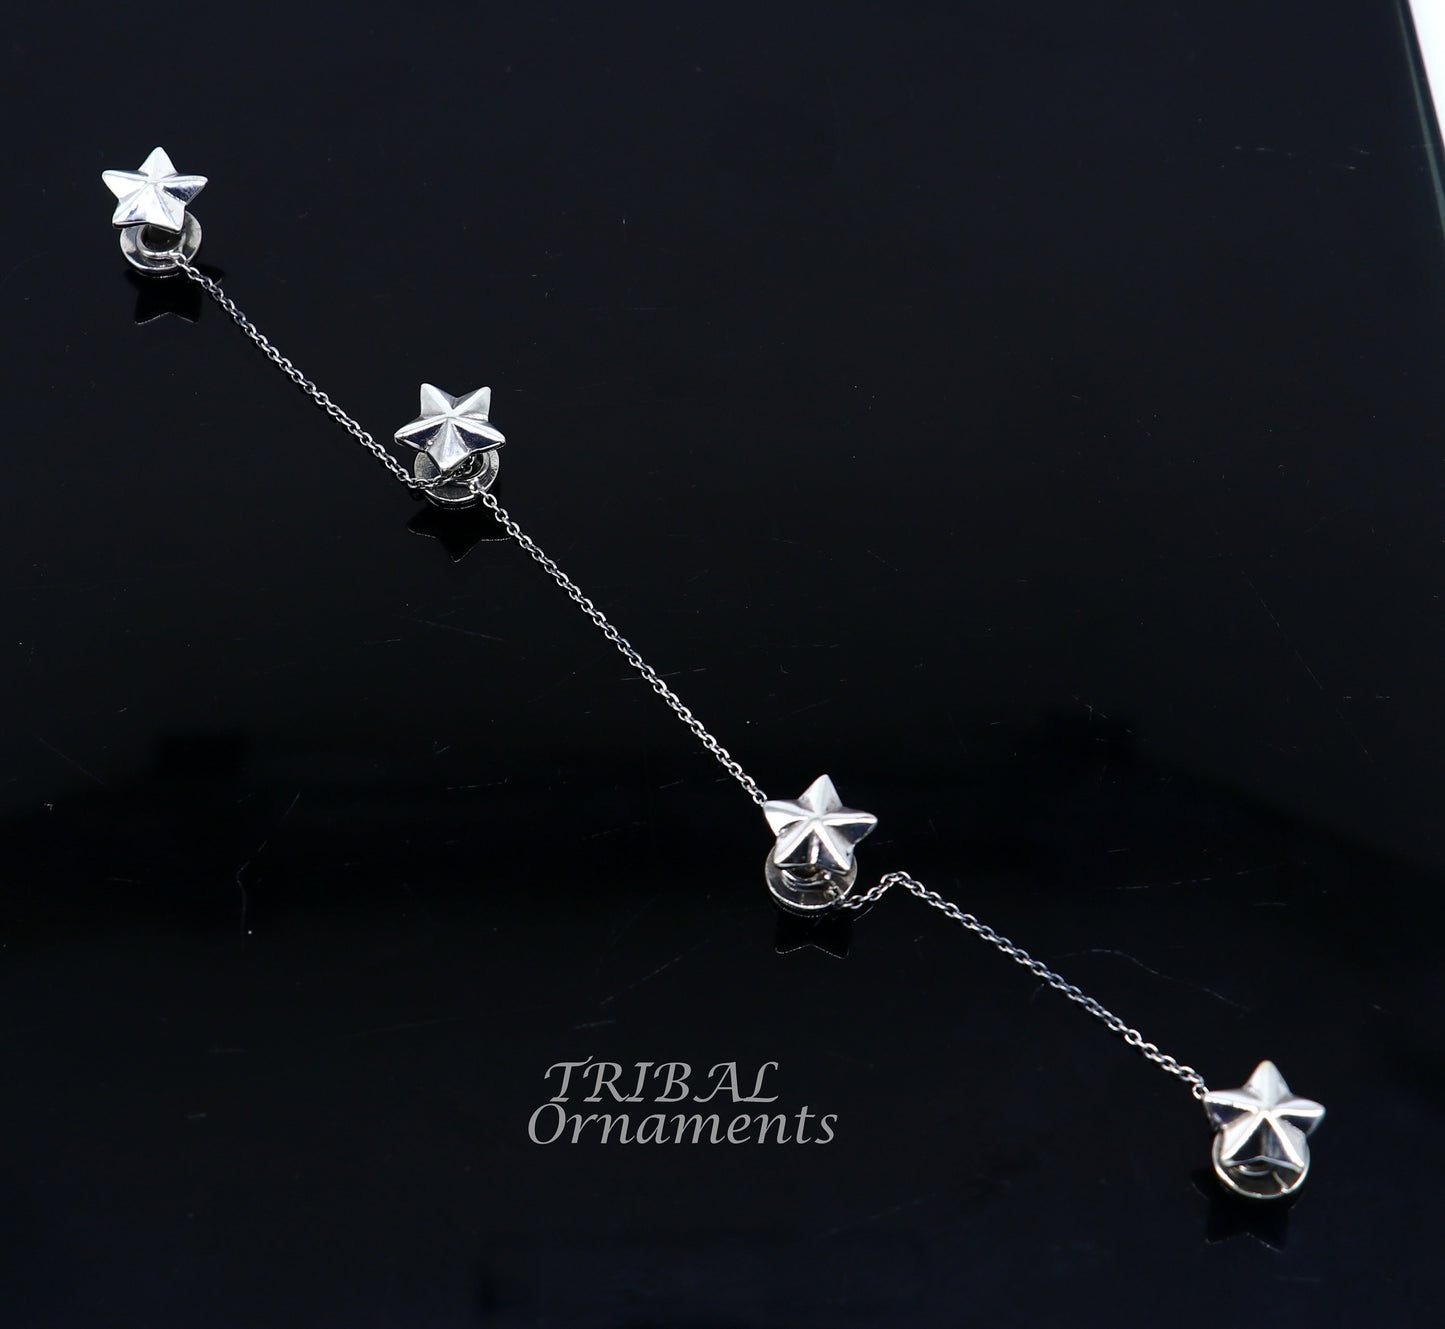 925 Sterling silver handmade gorgeous Star design buttons or cufflinks for men's kurta, best gifting jewelry occasions btn05 - TRIBAL ORNAMENTS